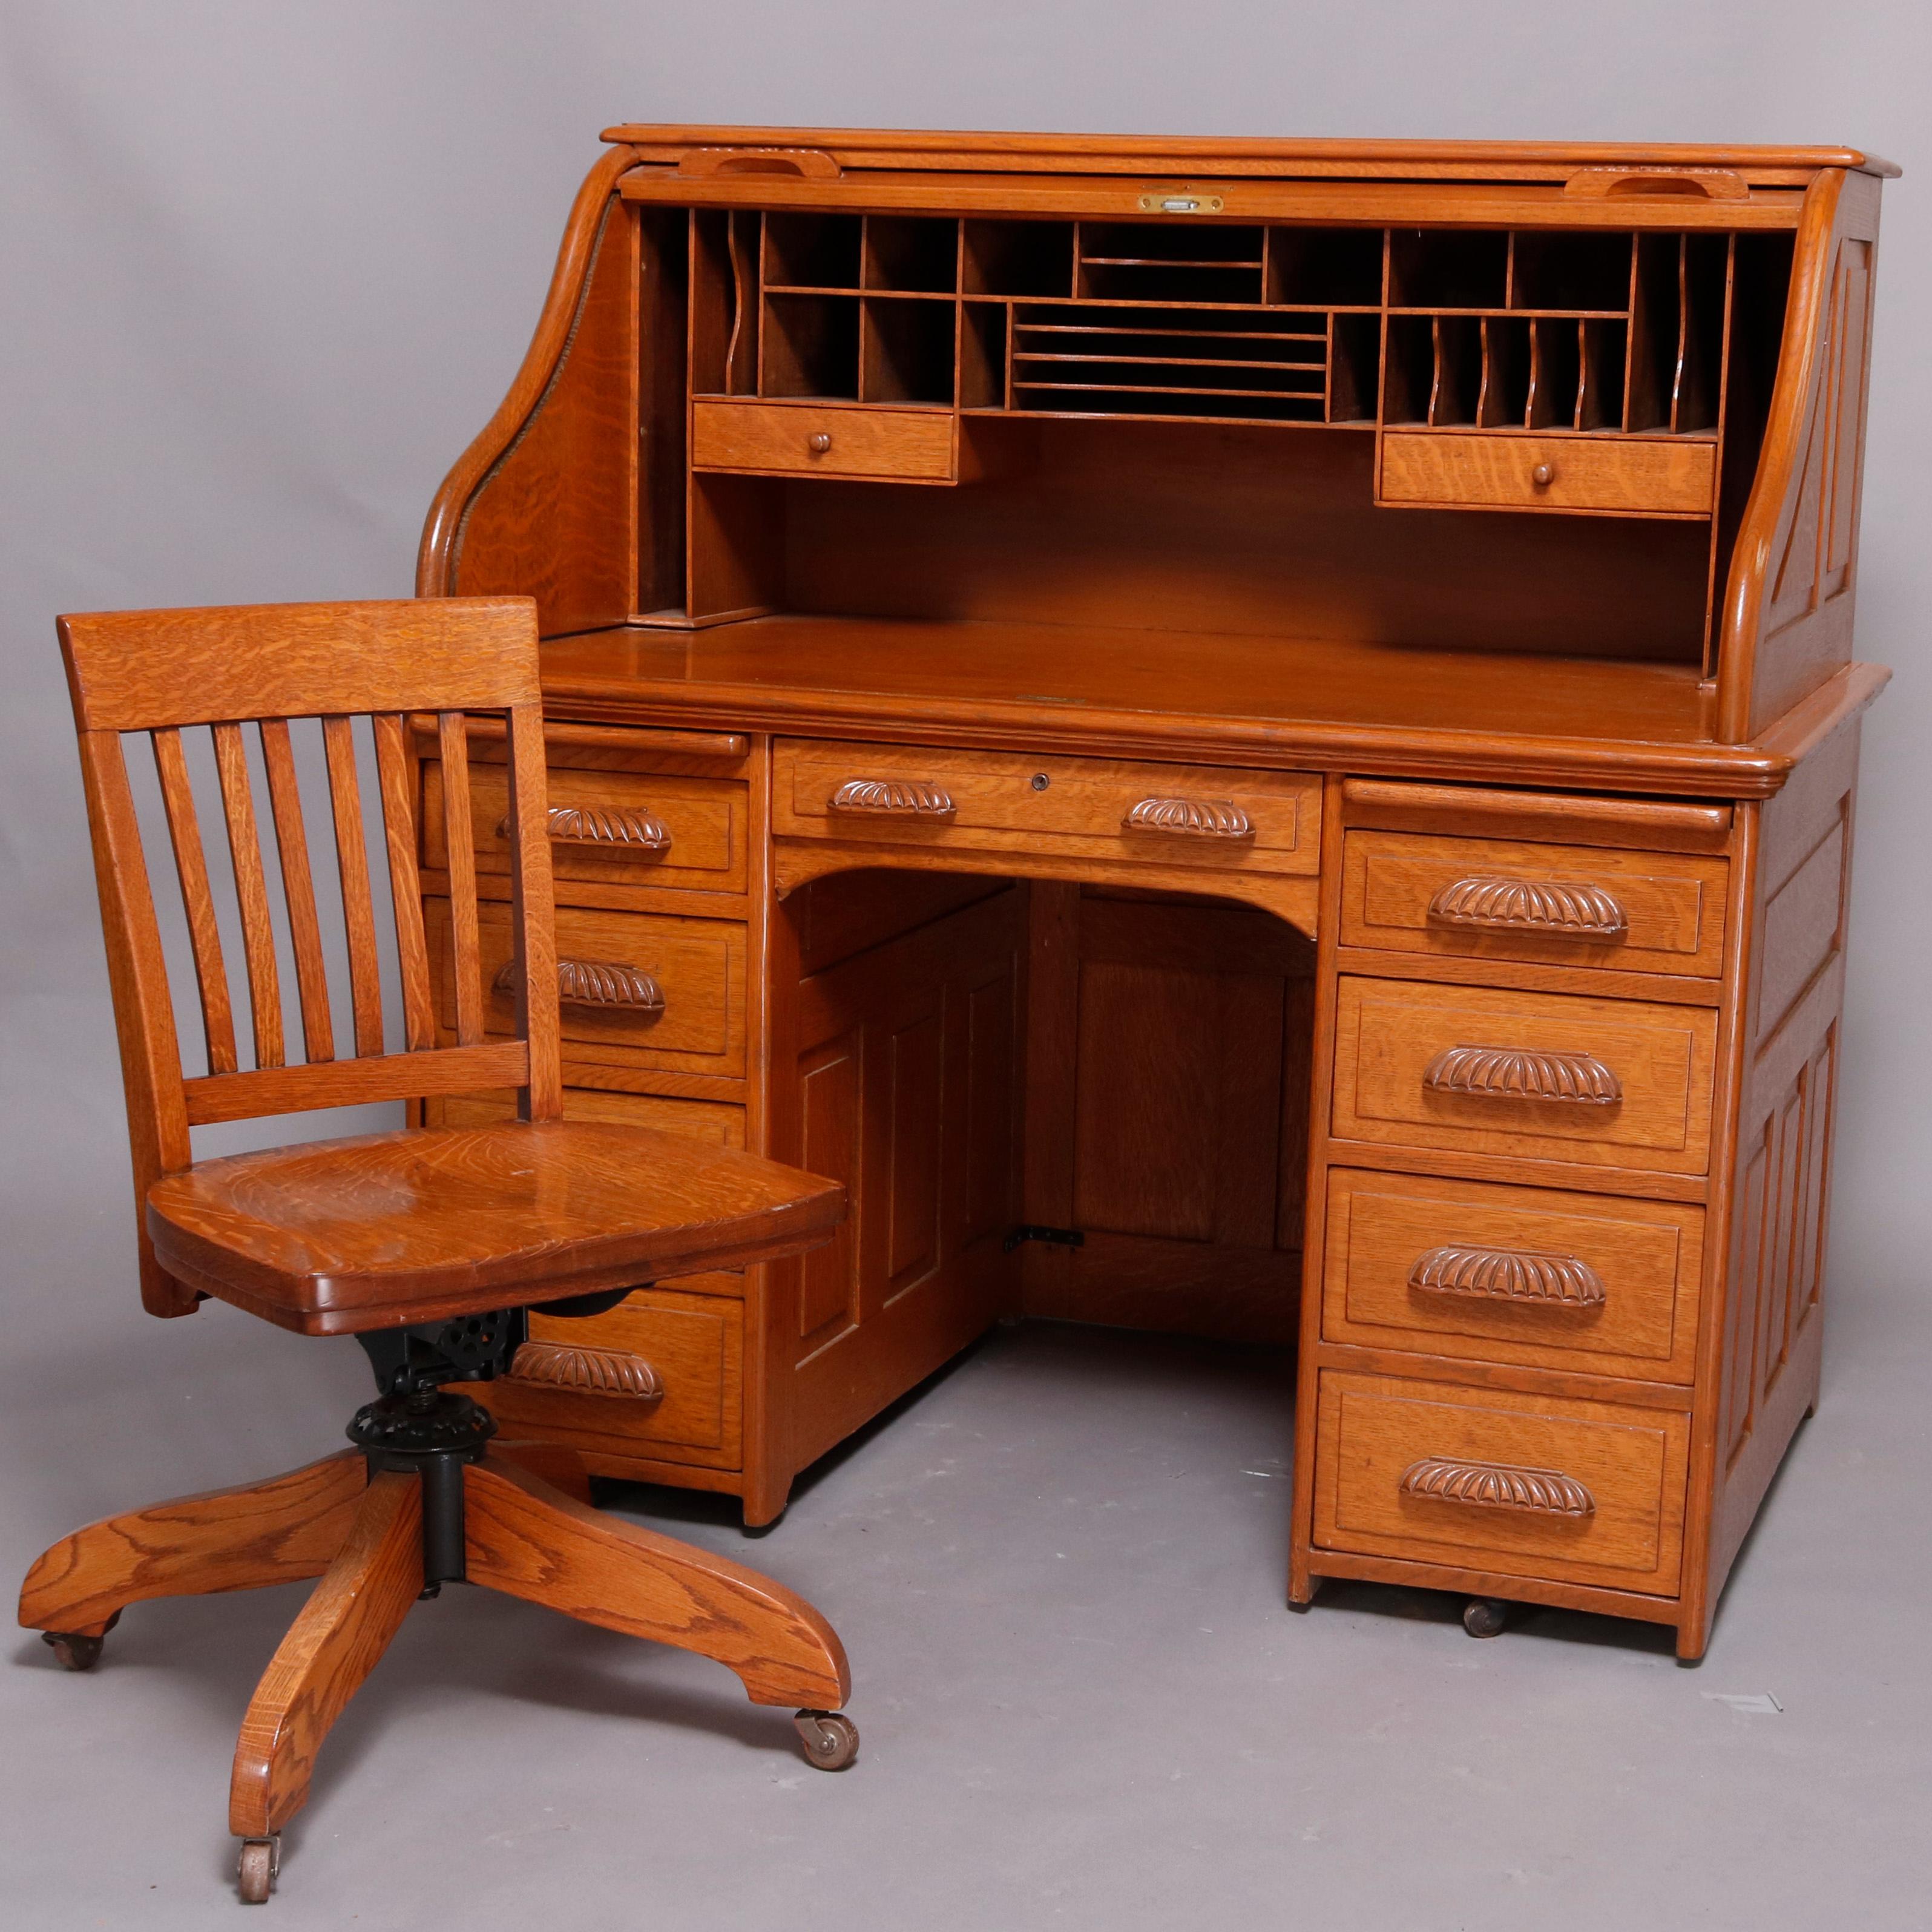 Antique derby school desk by features quarter sawn oak construction with S-form roll top opening to interior pigeon holes and drawers; paneled sides and back; flanking drawer towers; foliate and shell carved cup handles throughout; oak rolling slat